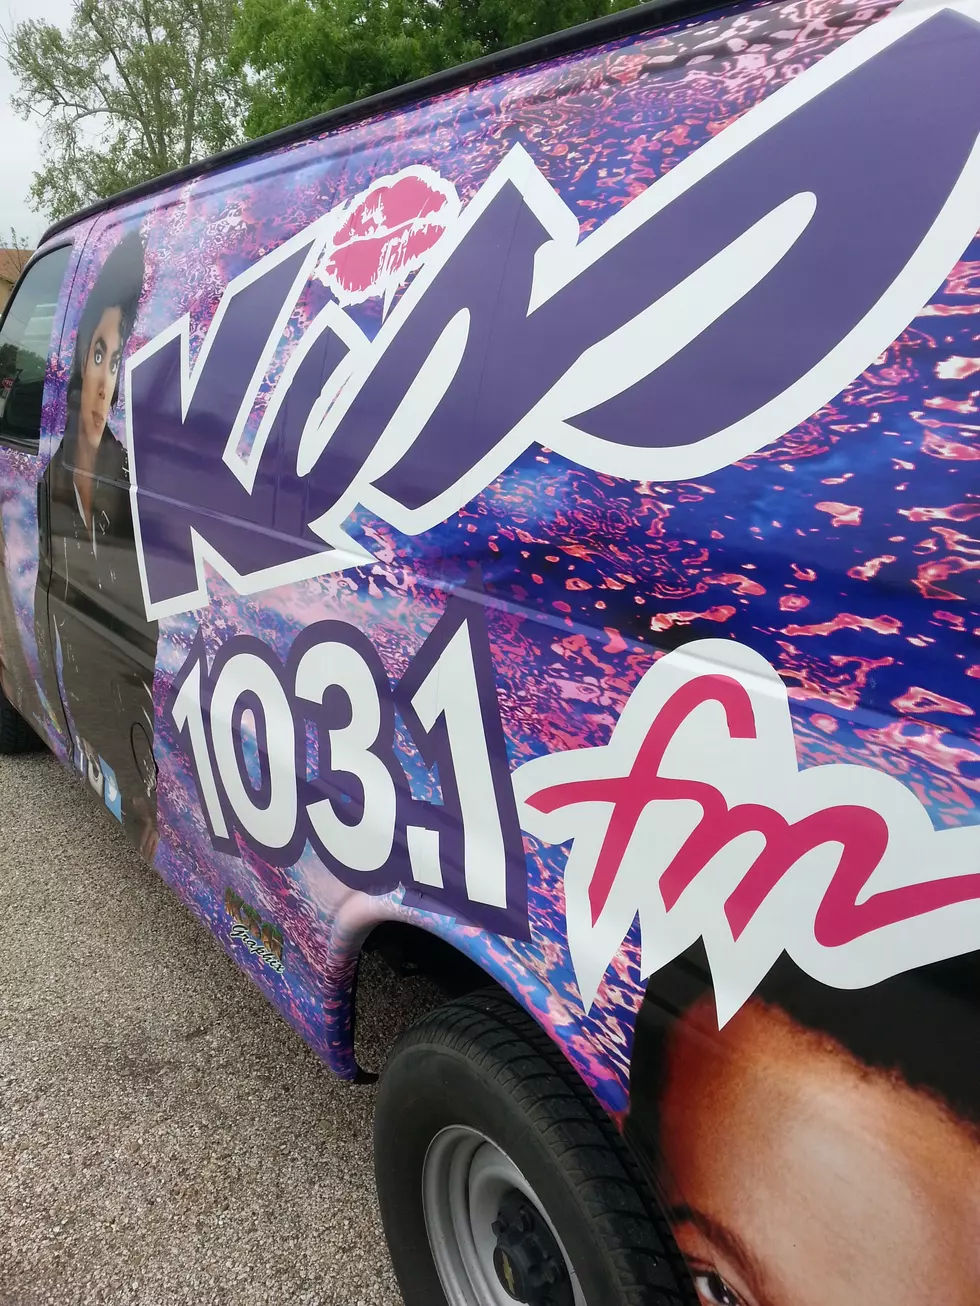 Kiss Broadcasting Live In Killeen At Dodge Country Used Cars Saturday!